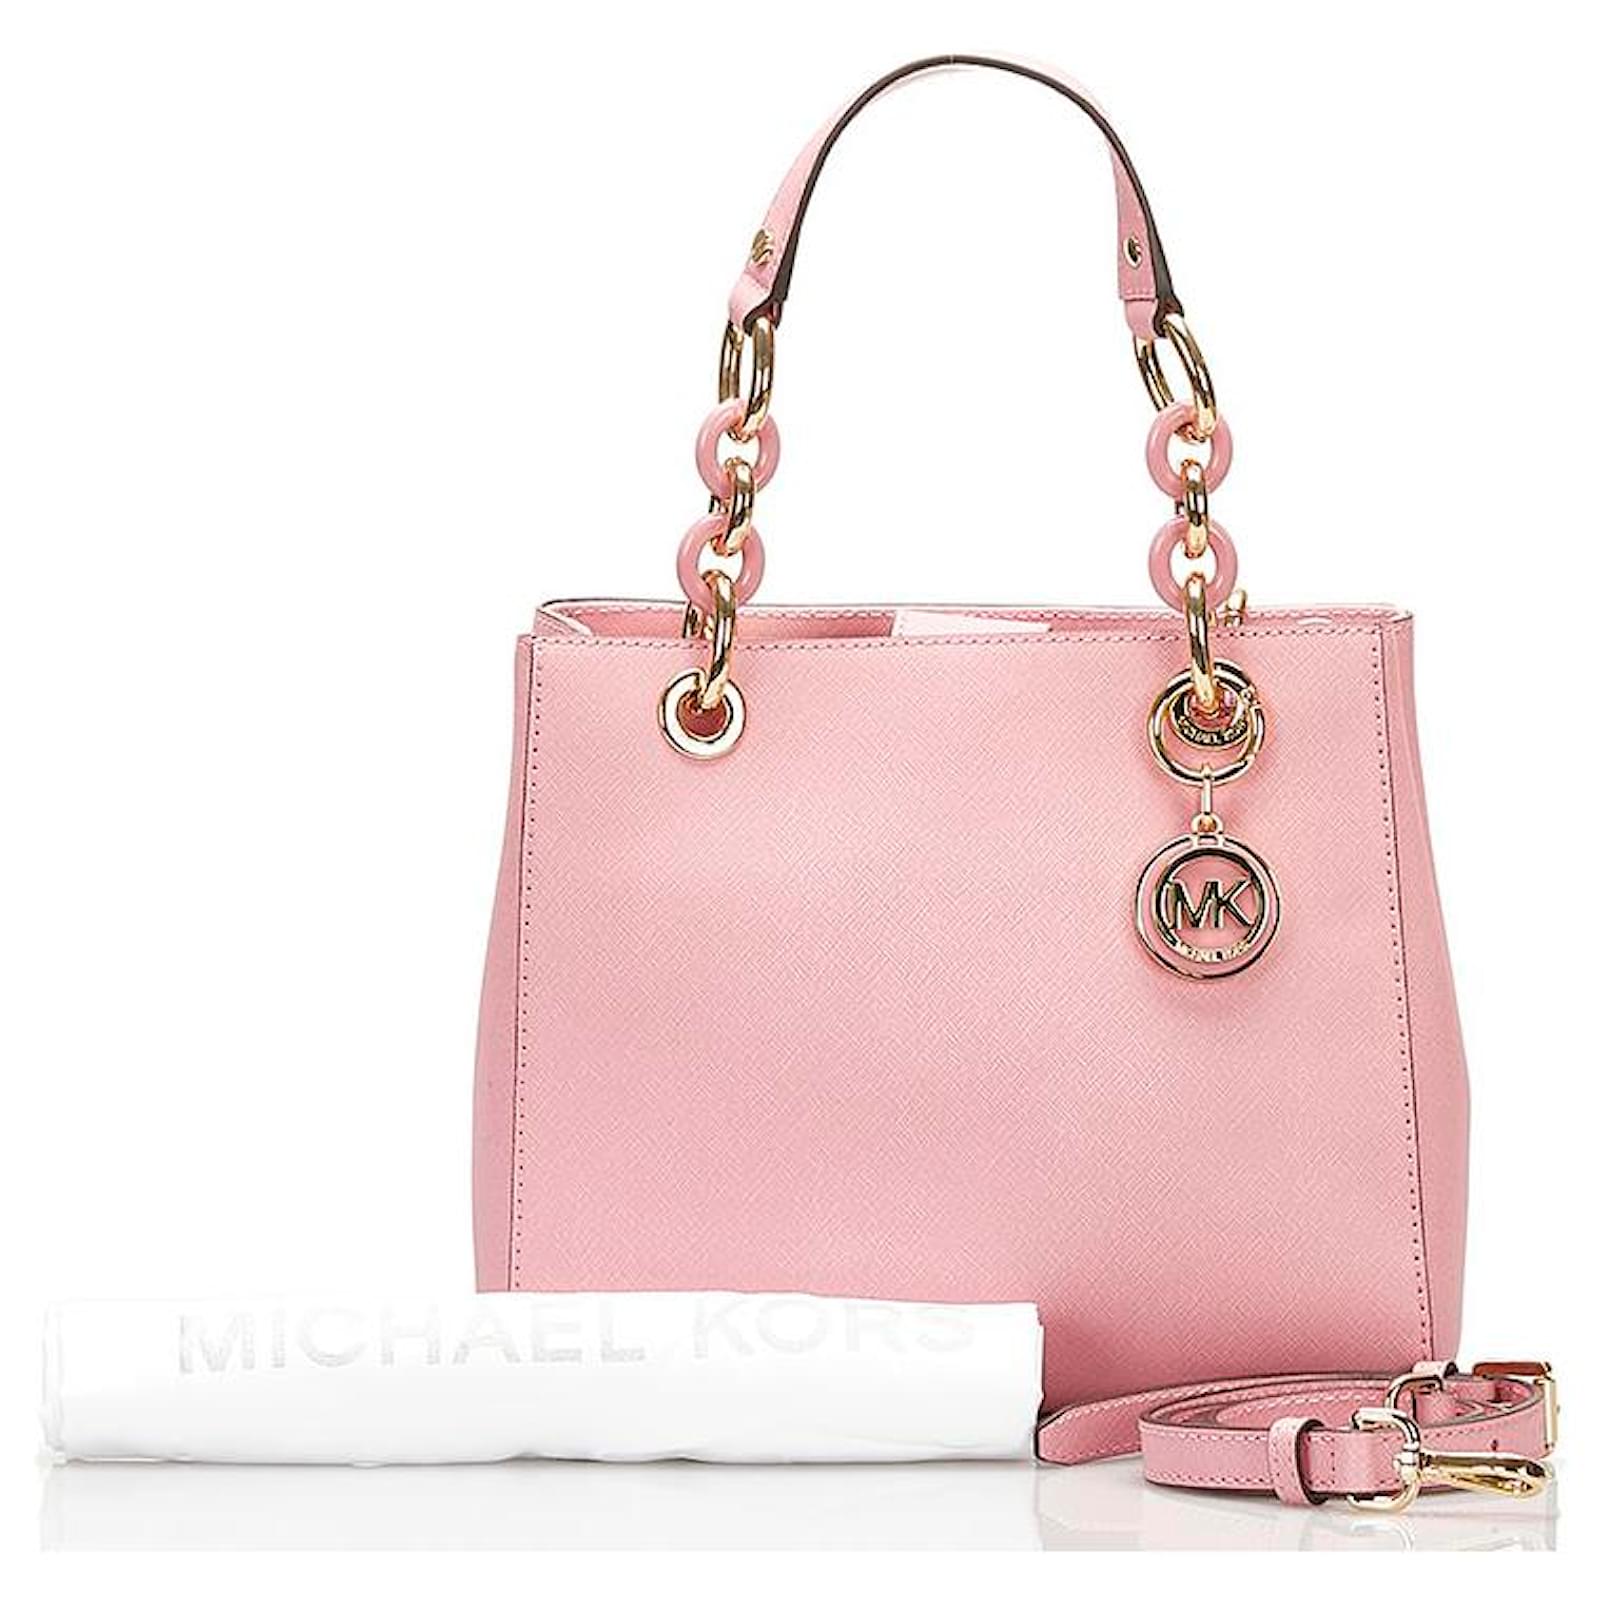 Michael Kors Light Pink Leather Small Mercer Tote